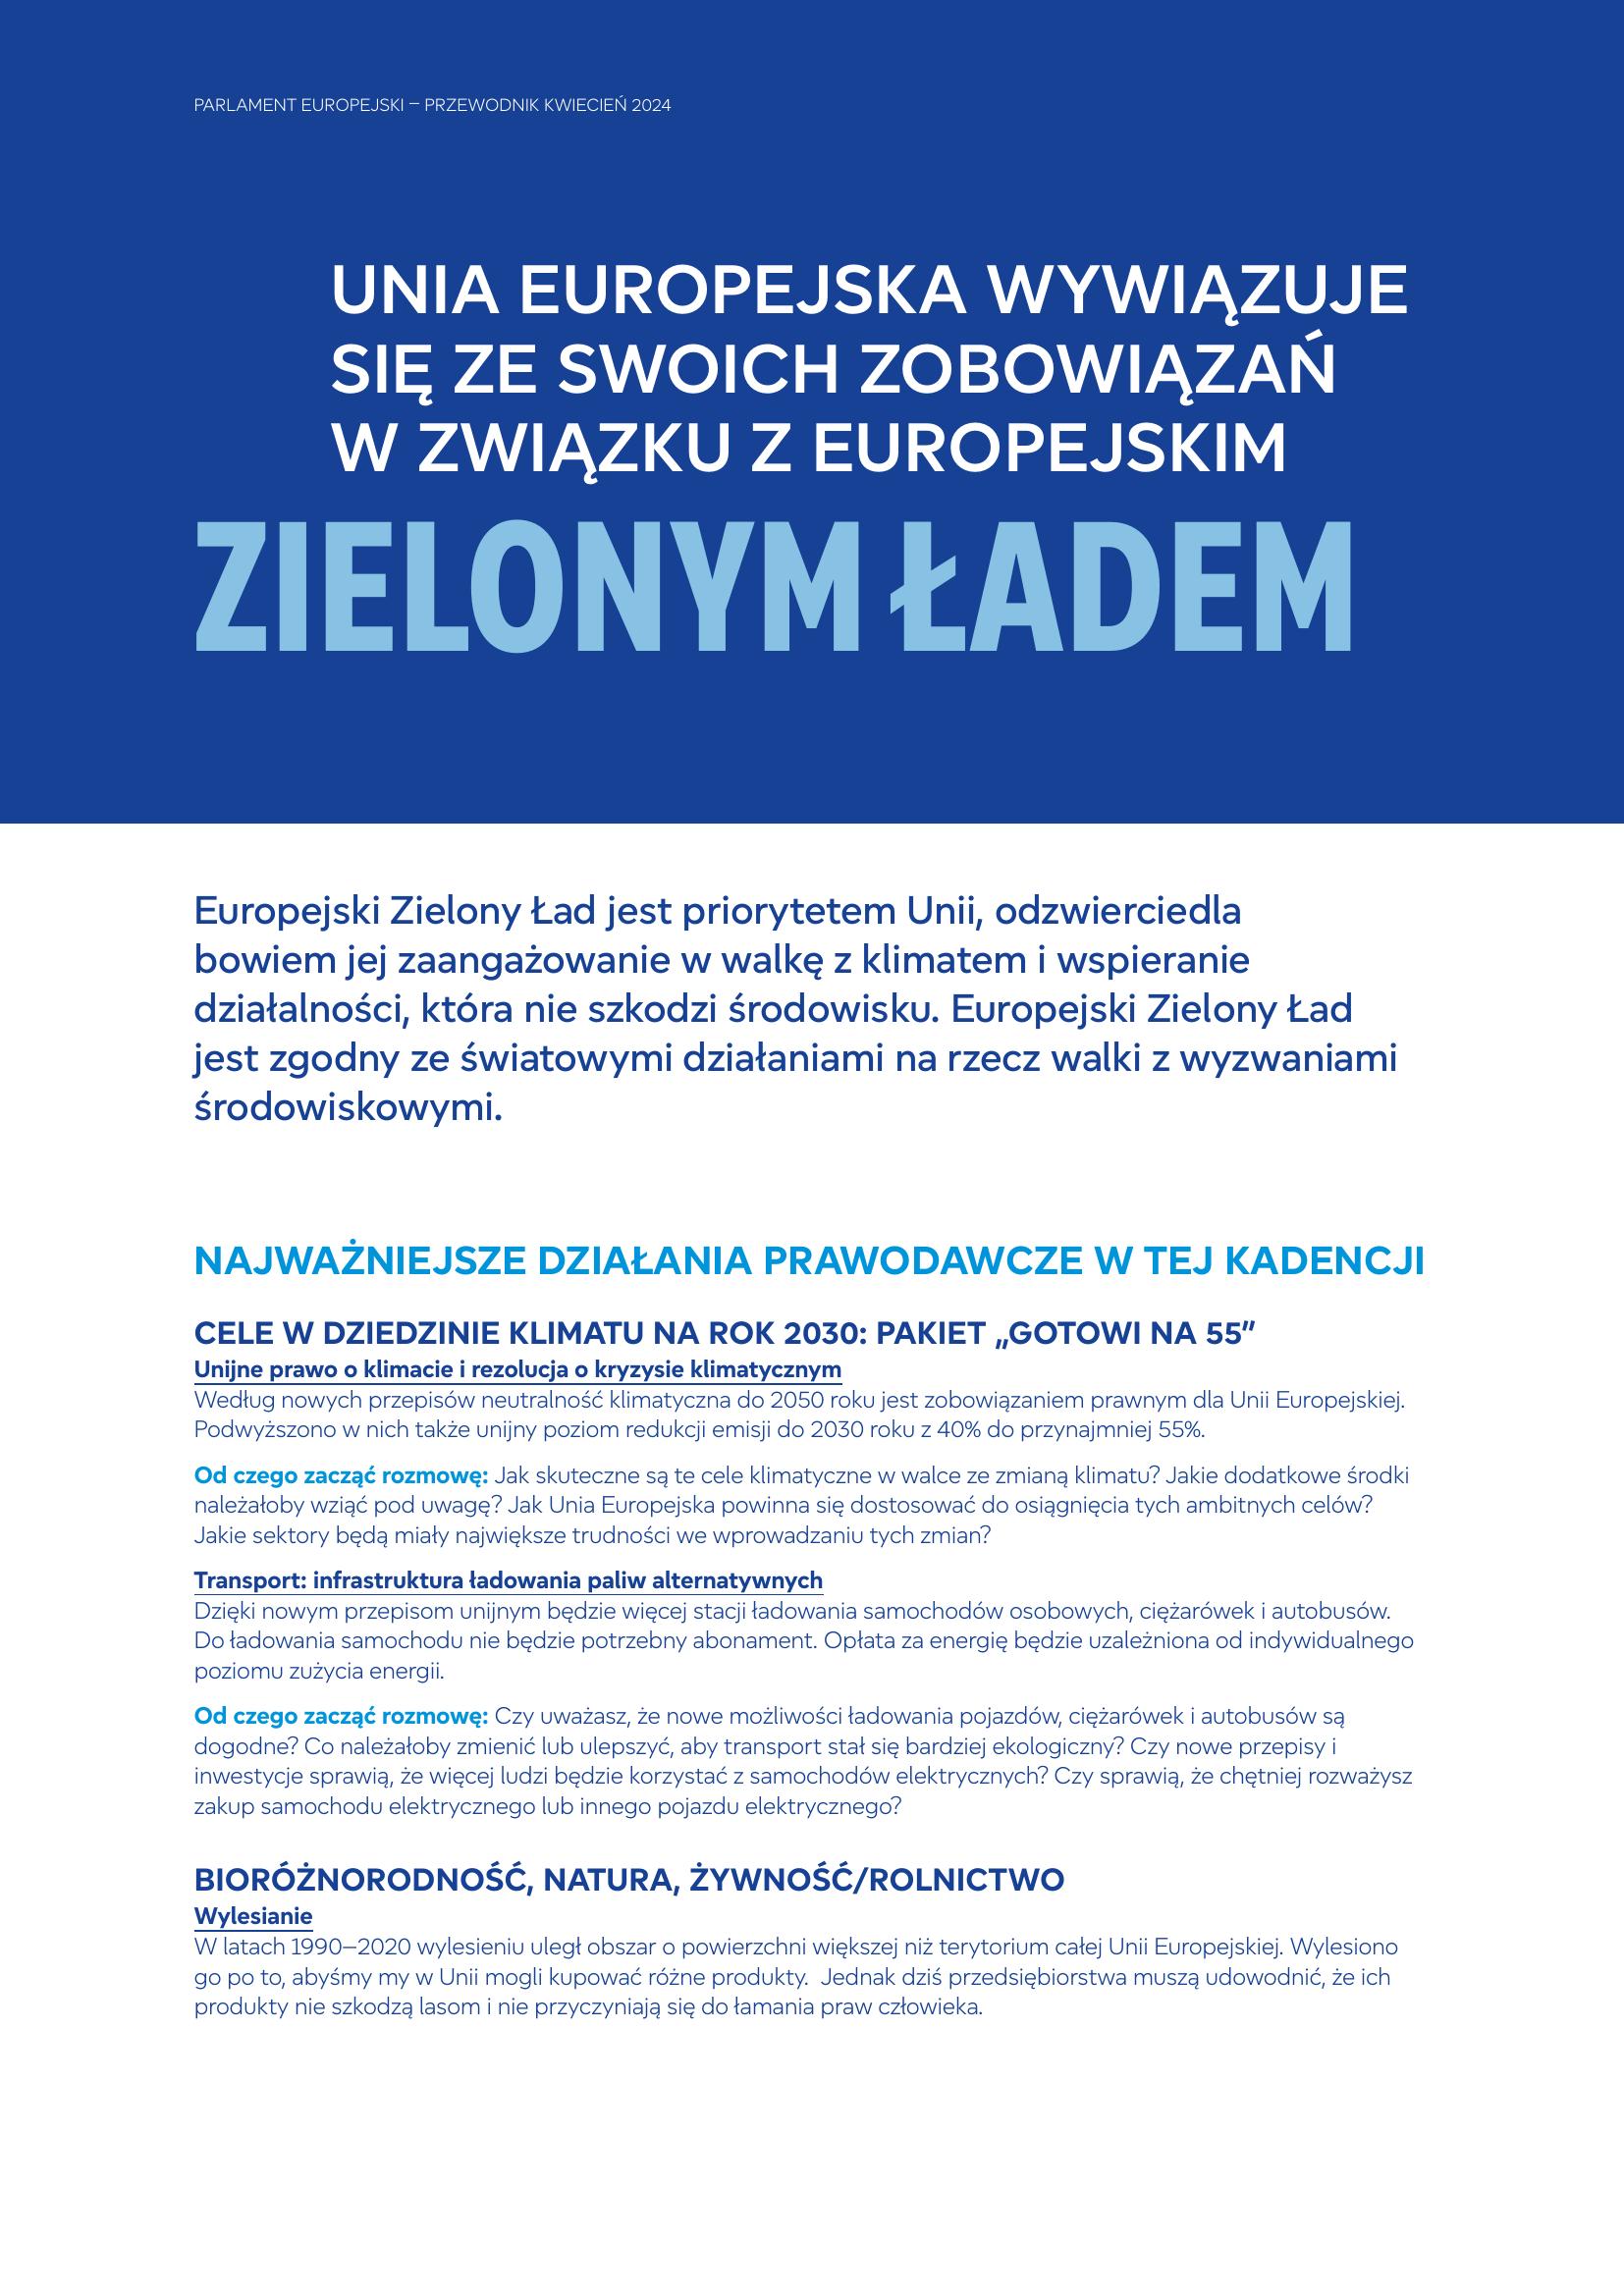 Together.eu_one-pager_GreenDeal_web.pdf